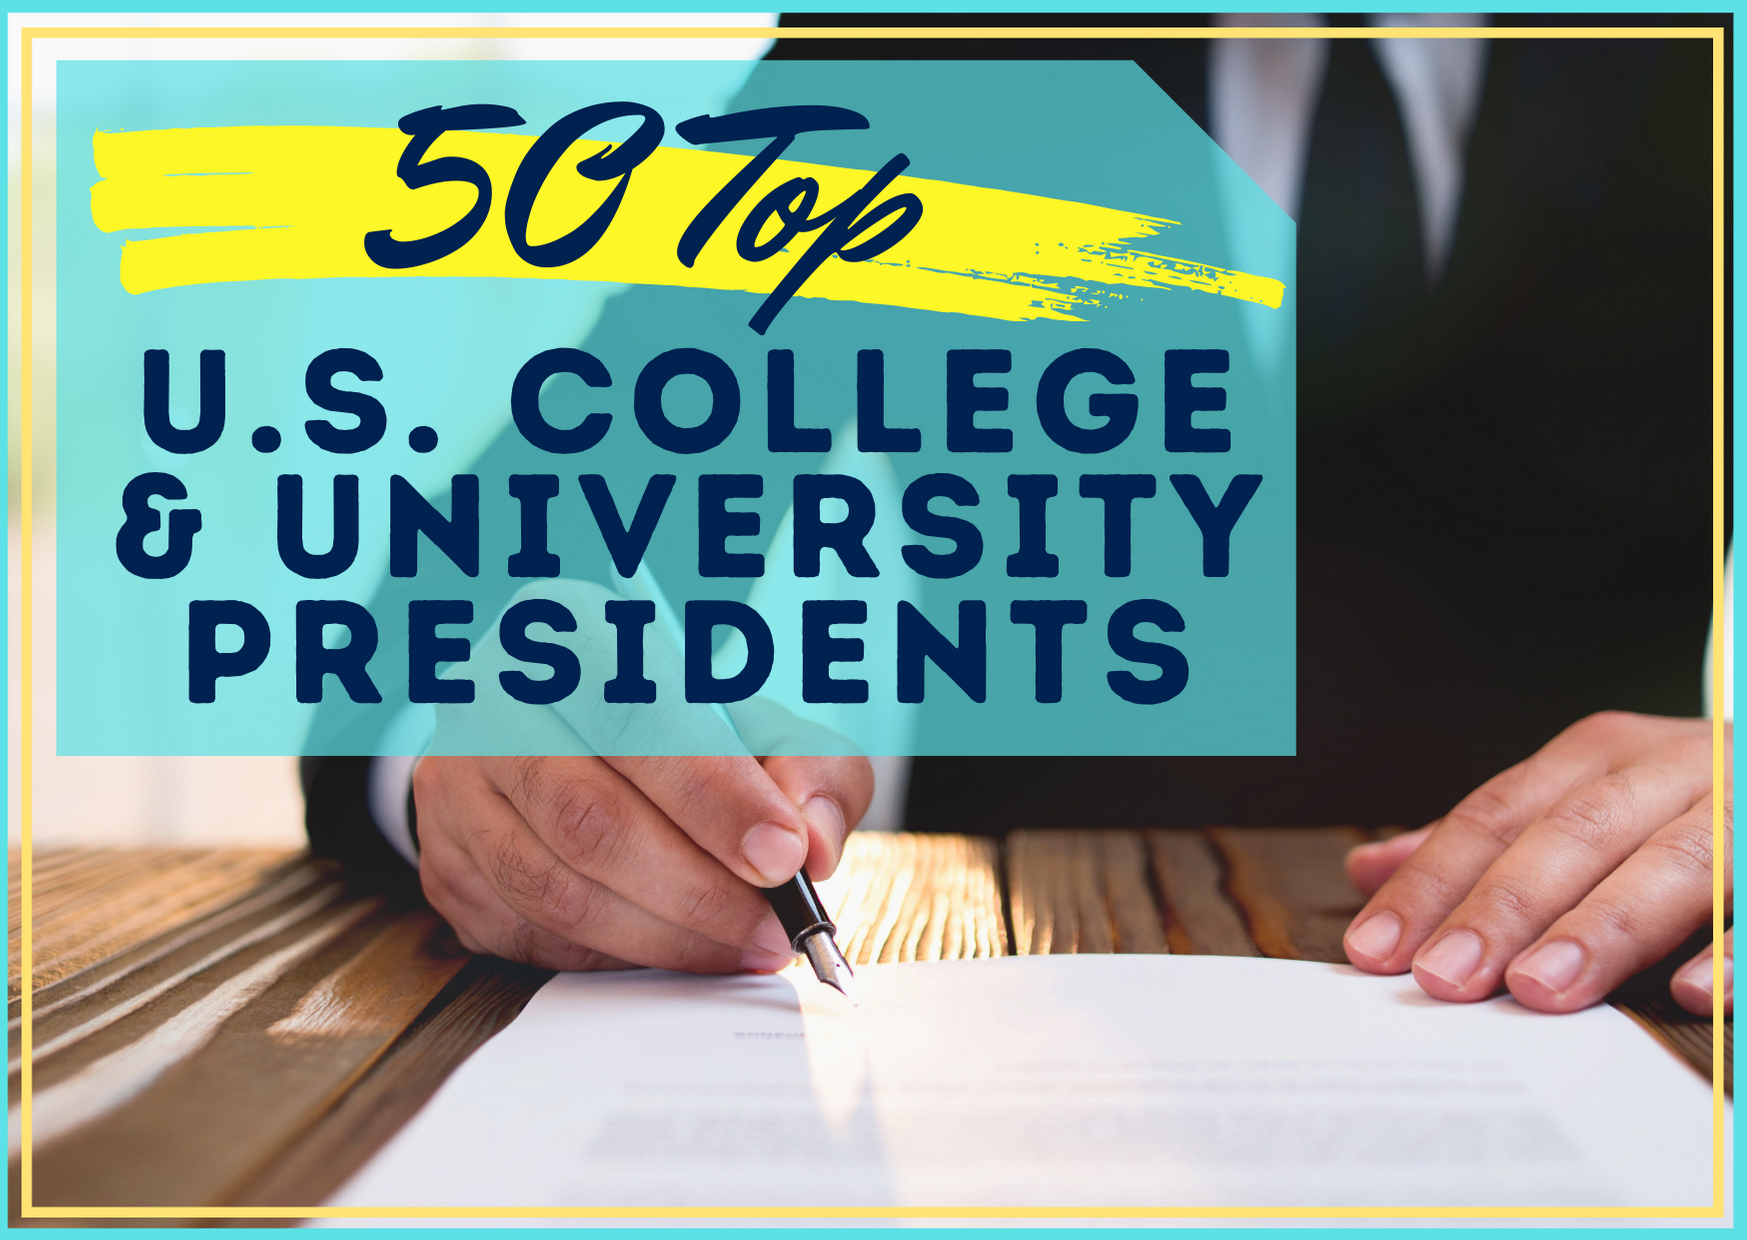 55 Top U.S. College and University Presidents College Cliffs